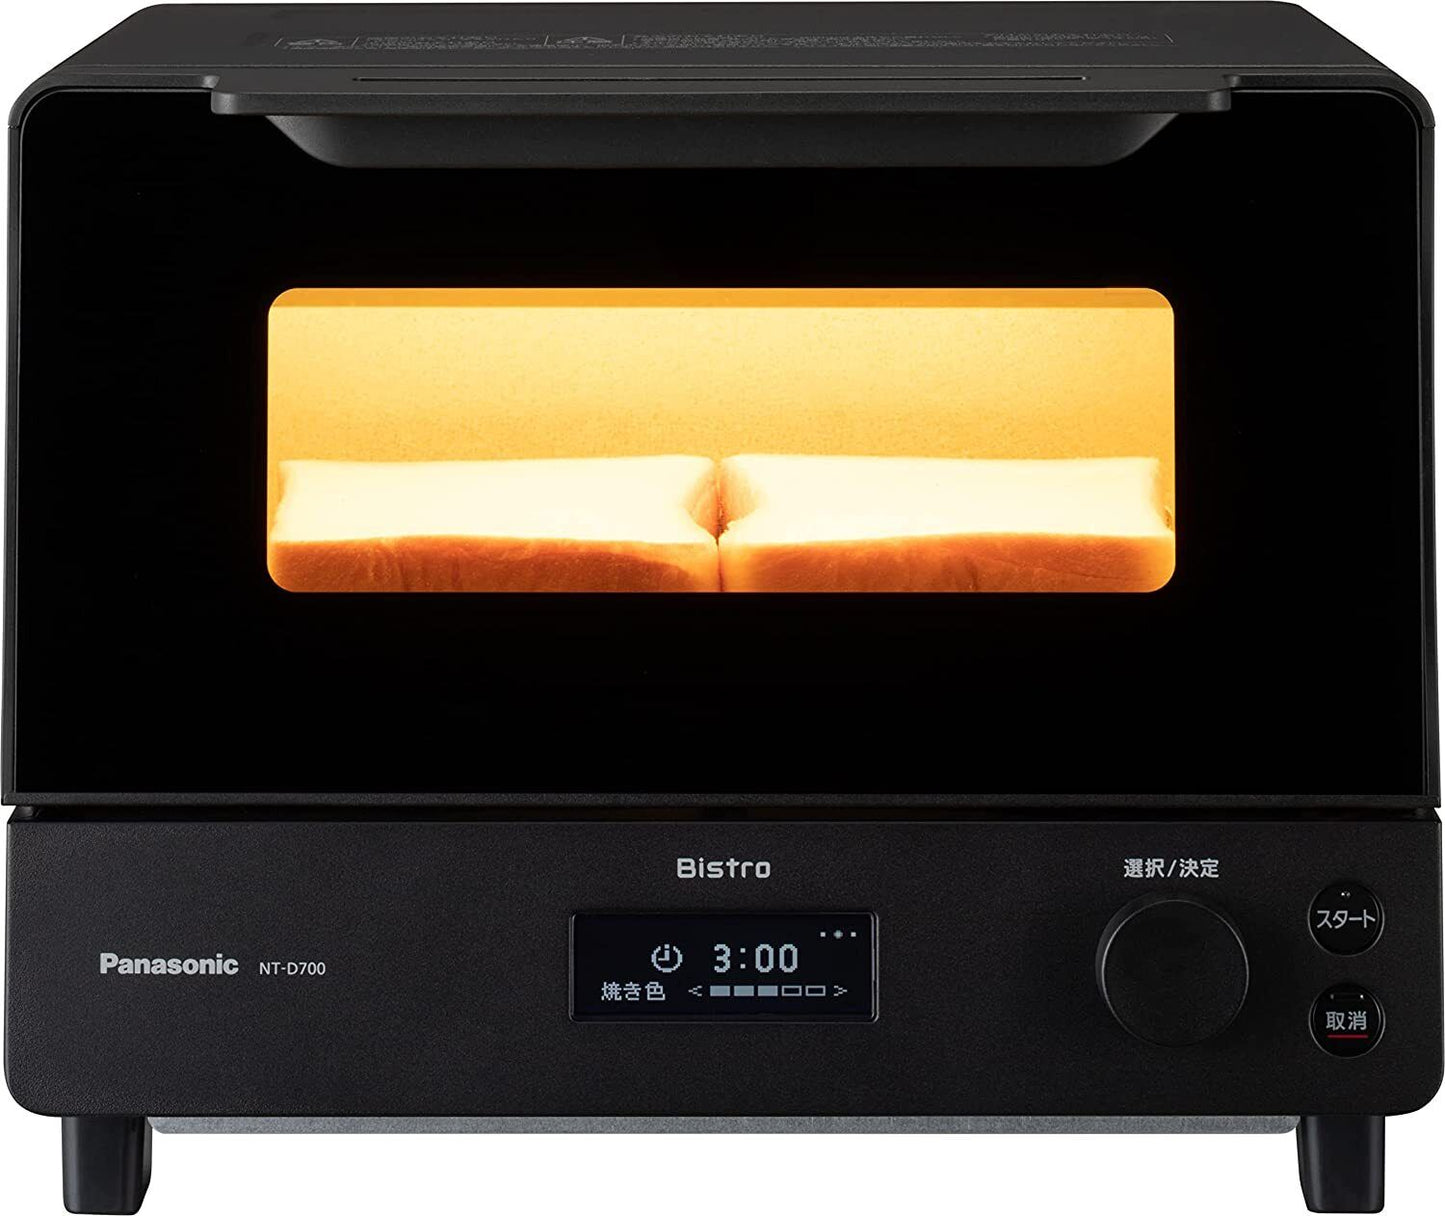 NT-D700 100V Panasonic Oven Toaster Bistro 8 Stage Temperature Control Obung New